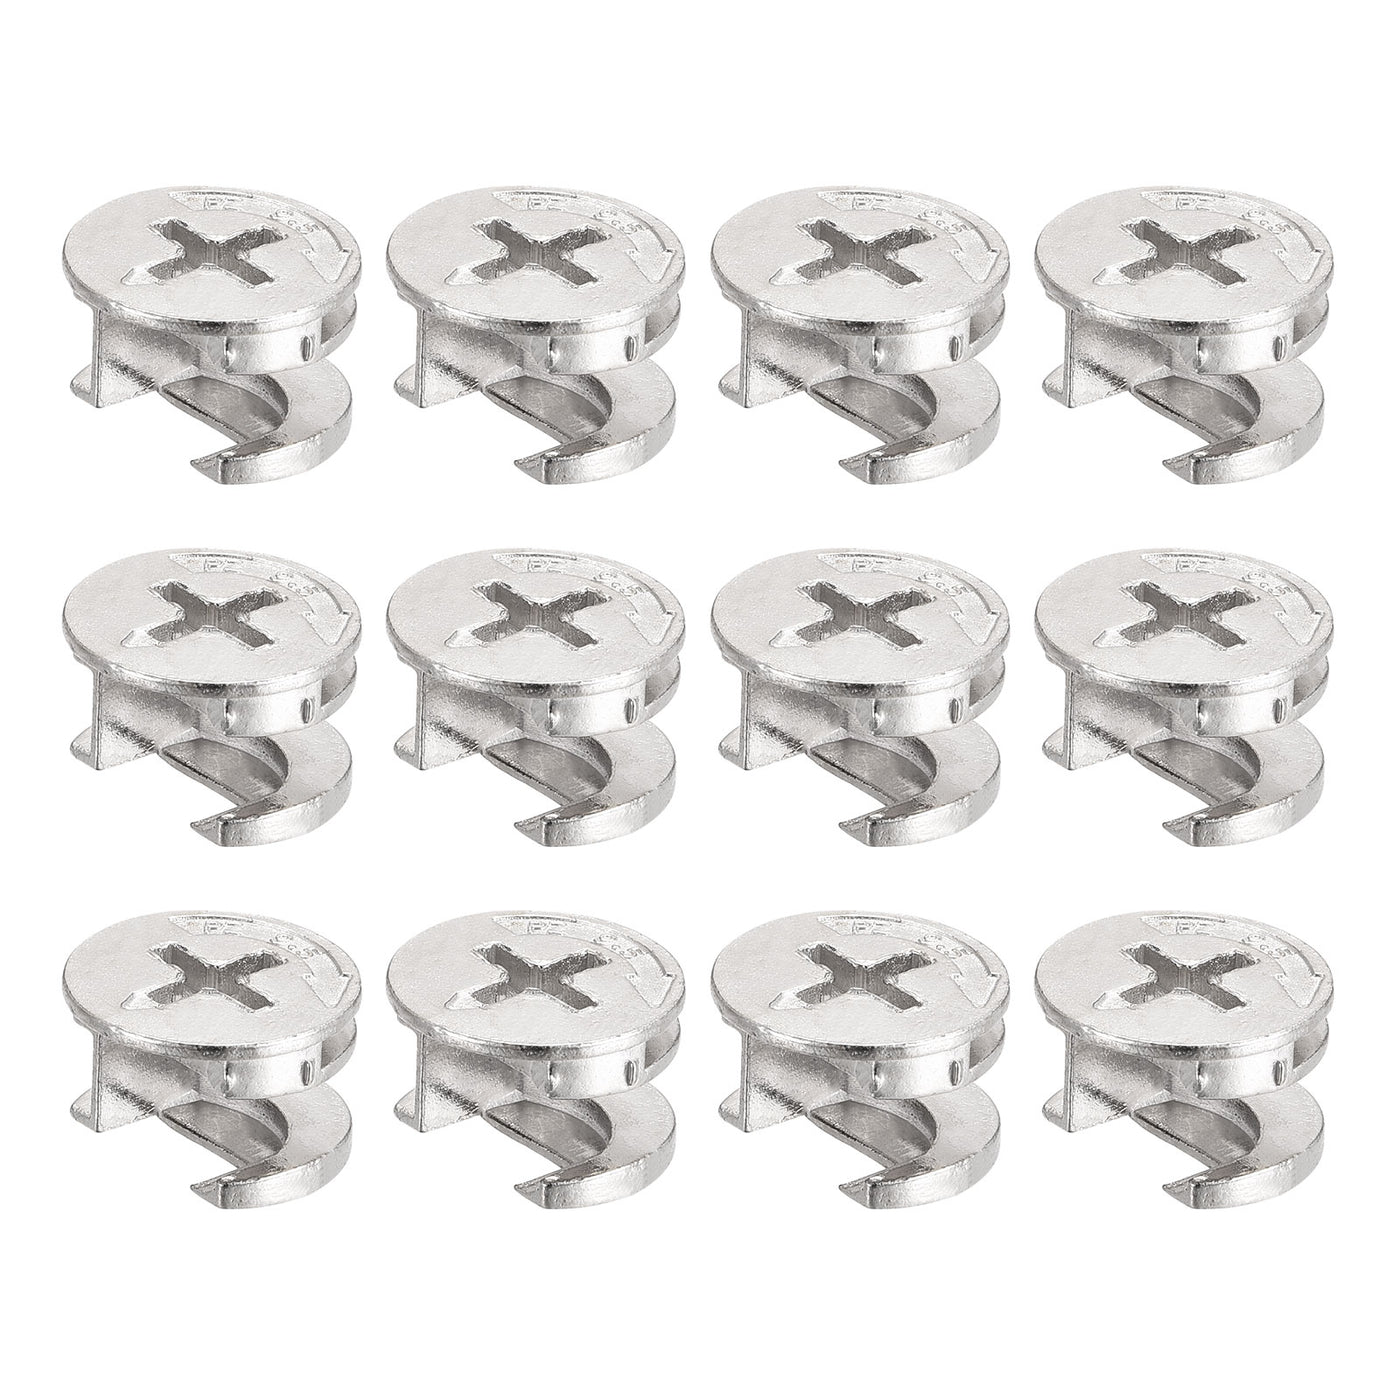 Uxcell Uxcell Cam Lock Nut for Furniture, 12pcs 14.6x9.5mm Joint Connector Locking Nuts